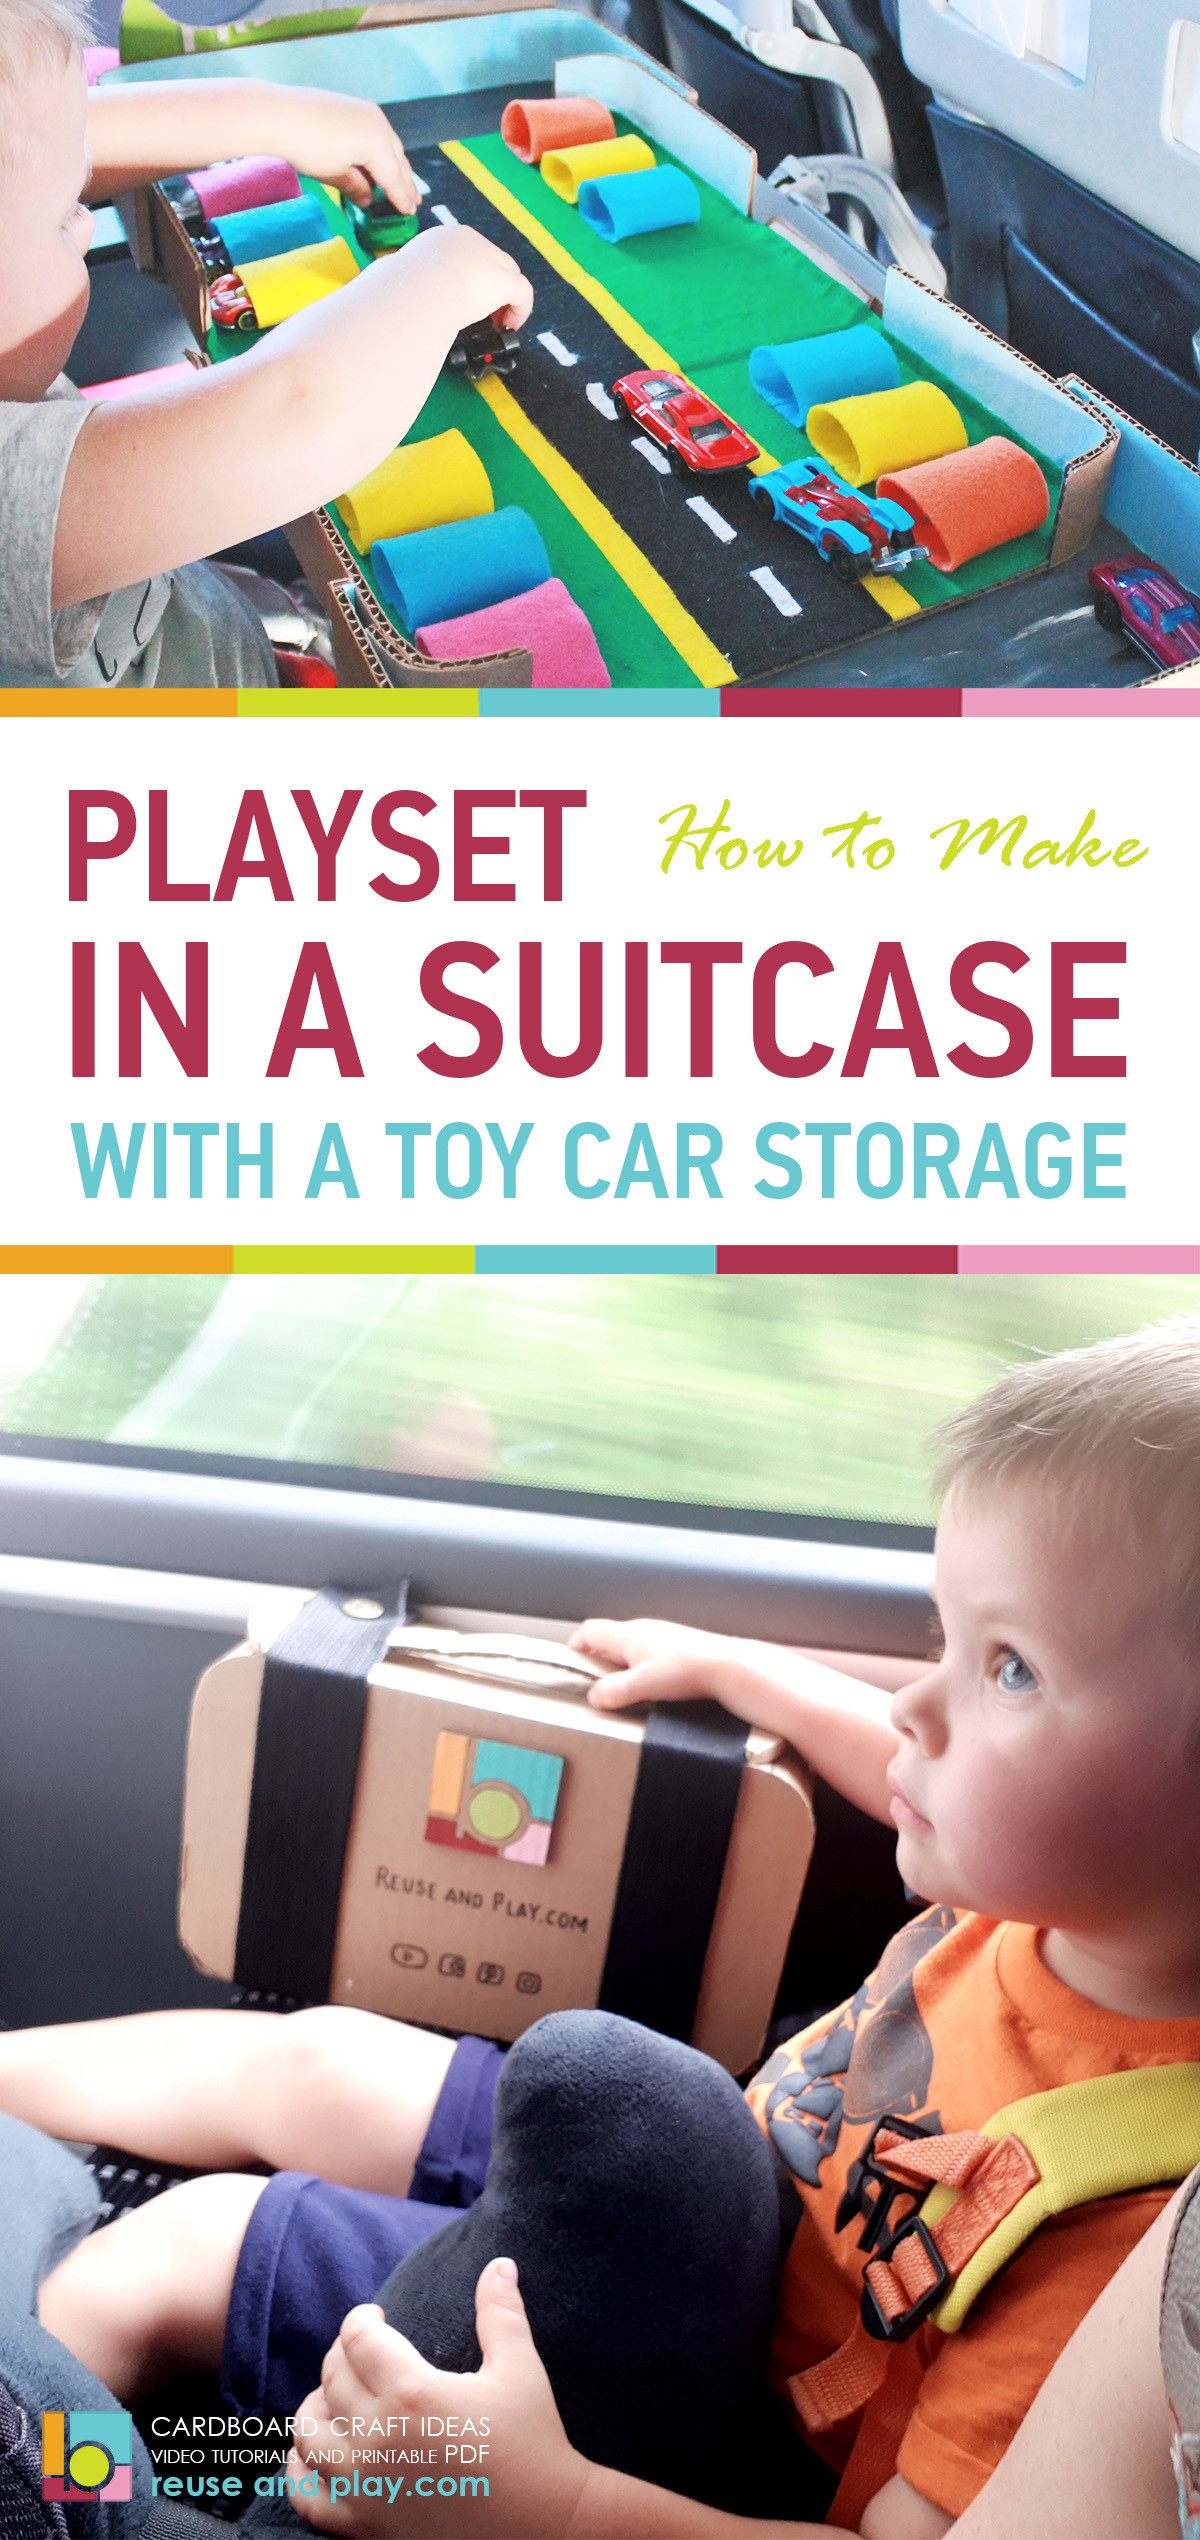 Playset in a suitcase with a toy car storage DIY Tutorial